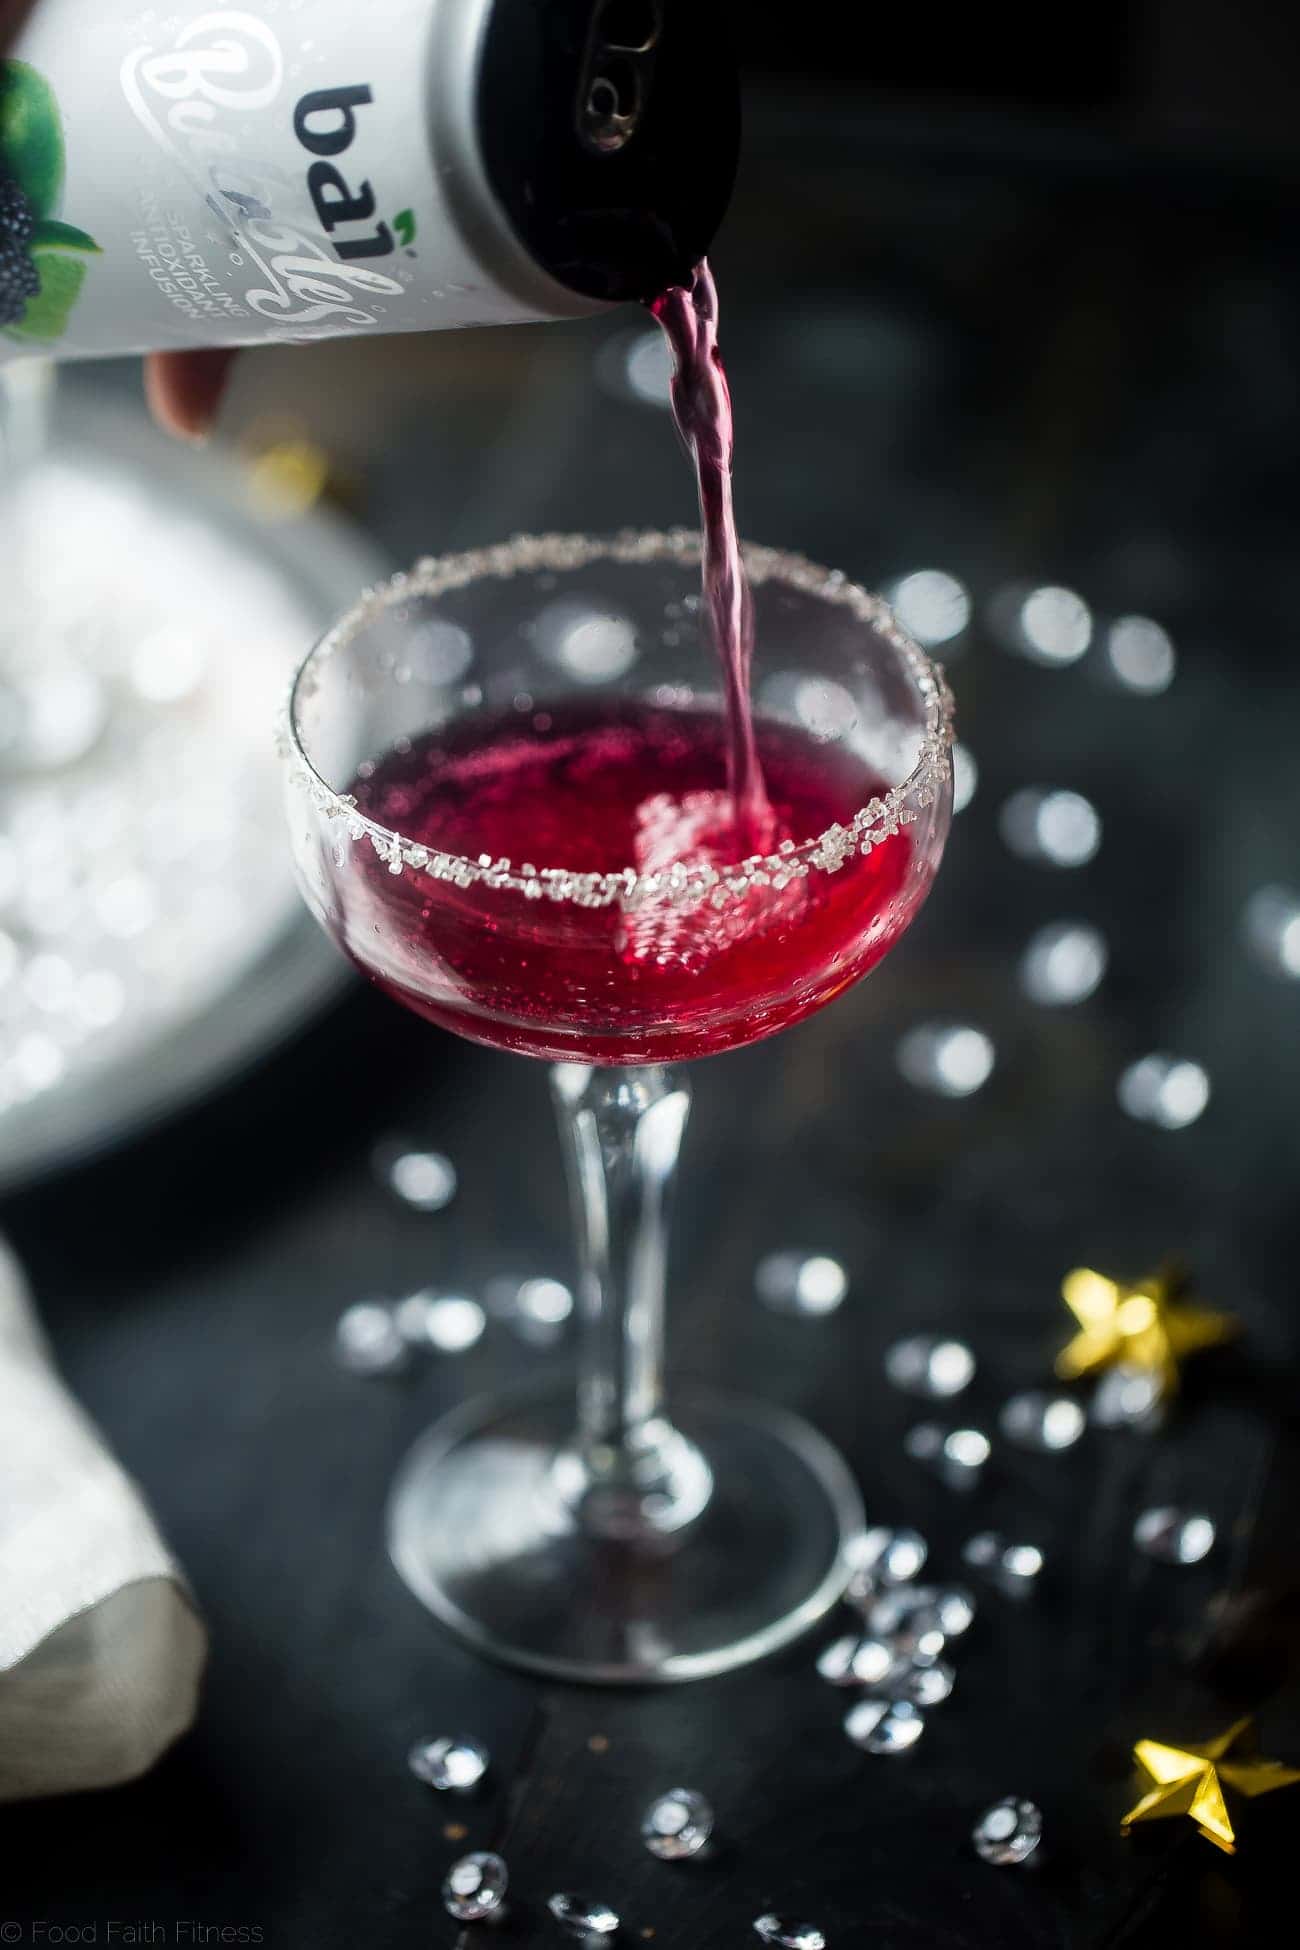 3 Ingredient Skinny Champagne Cocktails - Both of these blackberry raspberry and mango coconut sparkling champagne cocktails are under 150 calories and are naturally sweetened! Perfect for a healthy NYE! | Foodfaithfitness.com | @FoodFaithFit